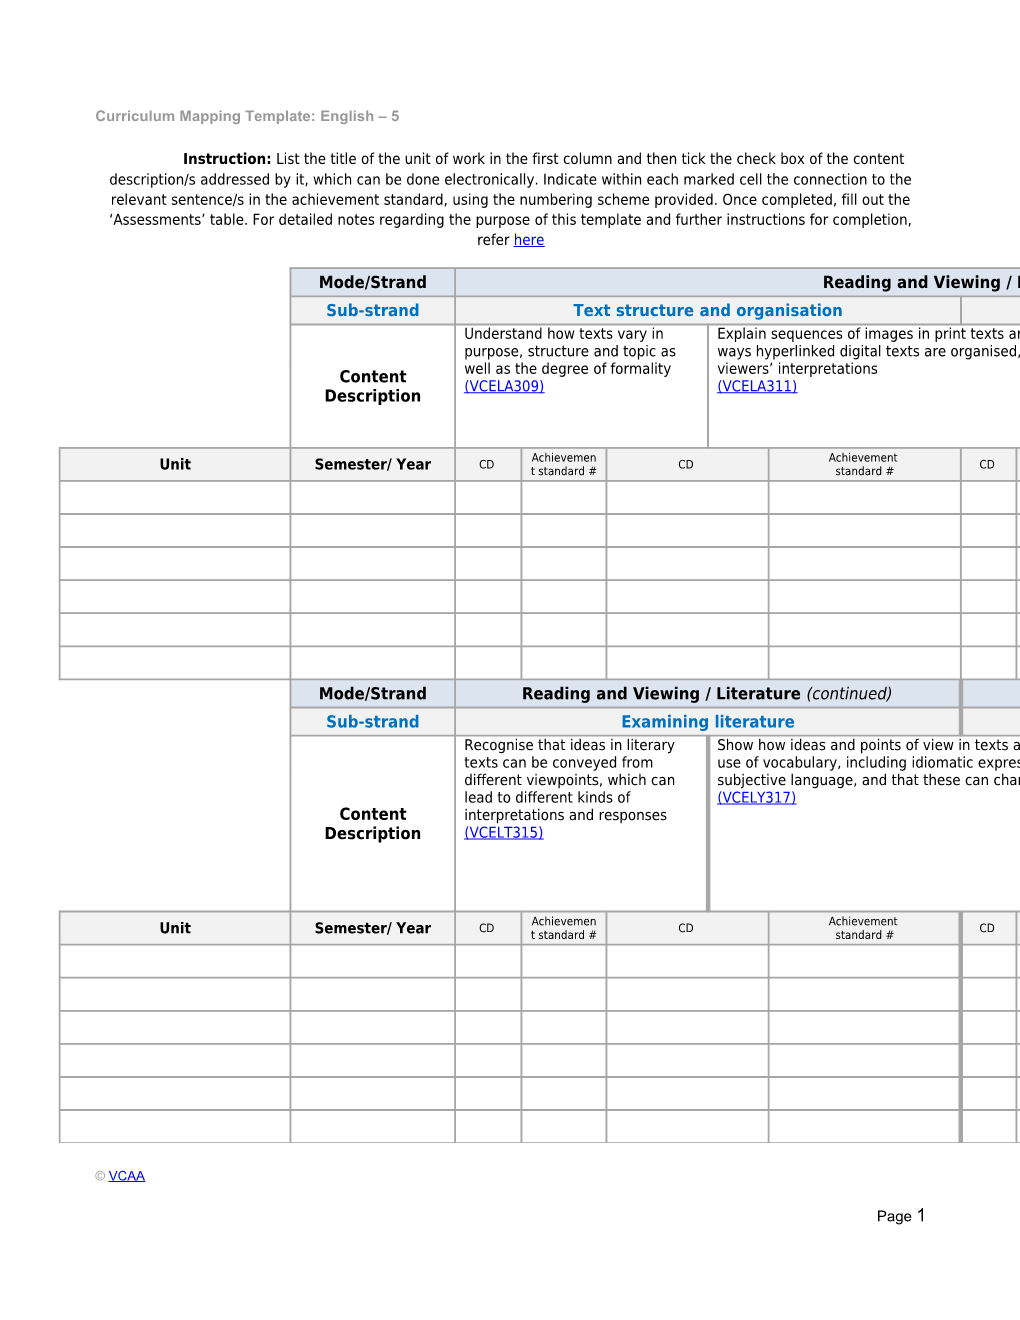 Curriculum Mapping Template: English 5